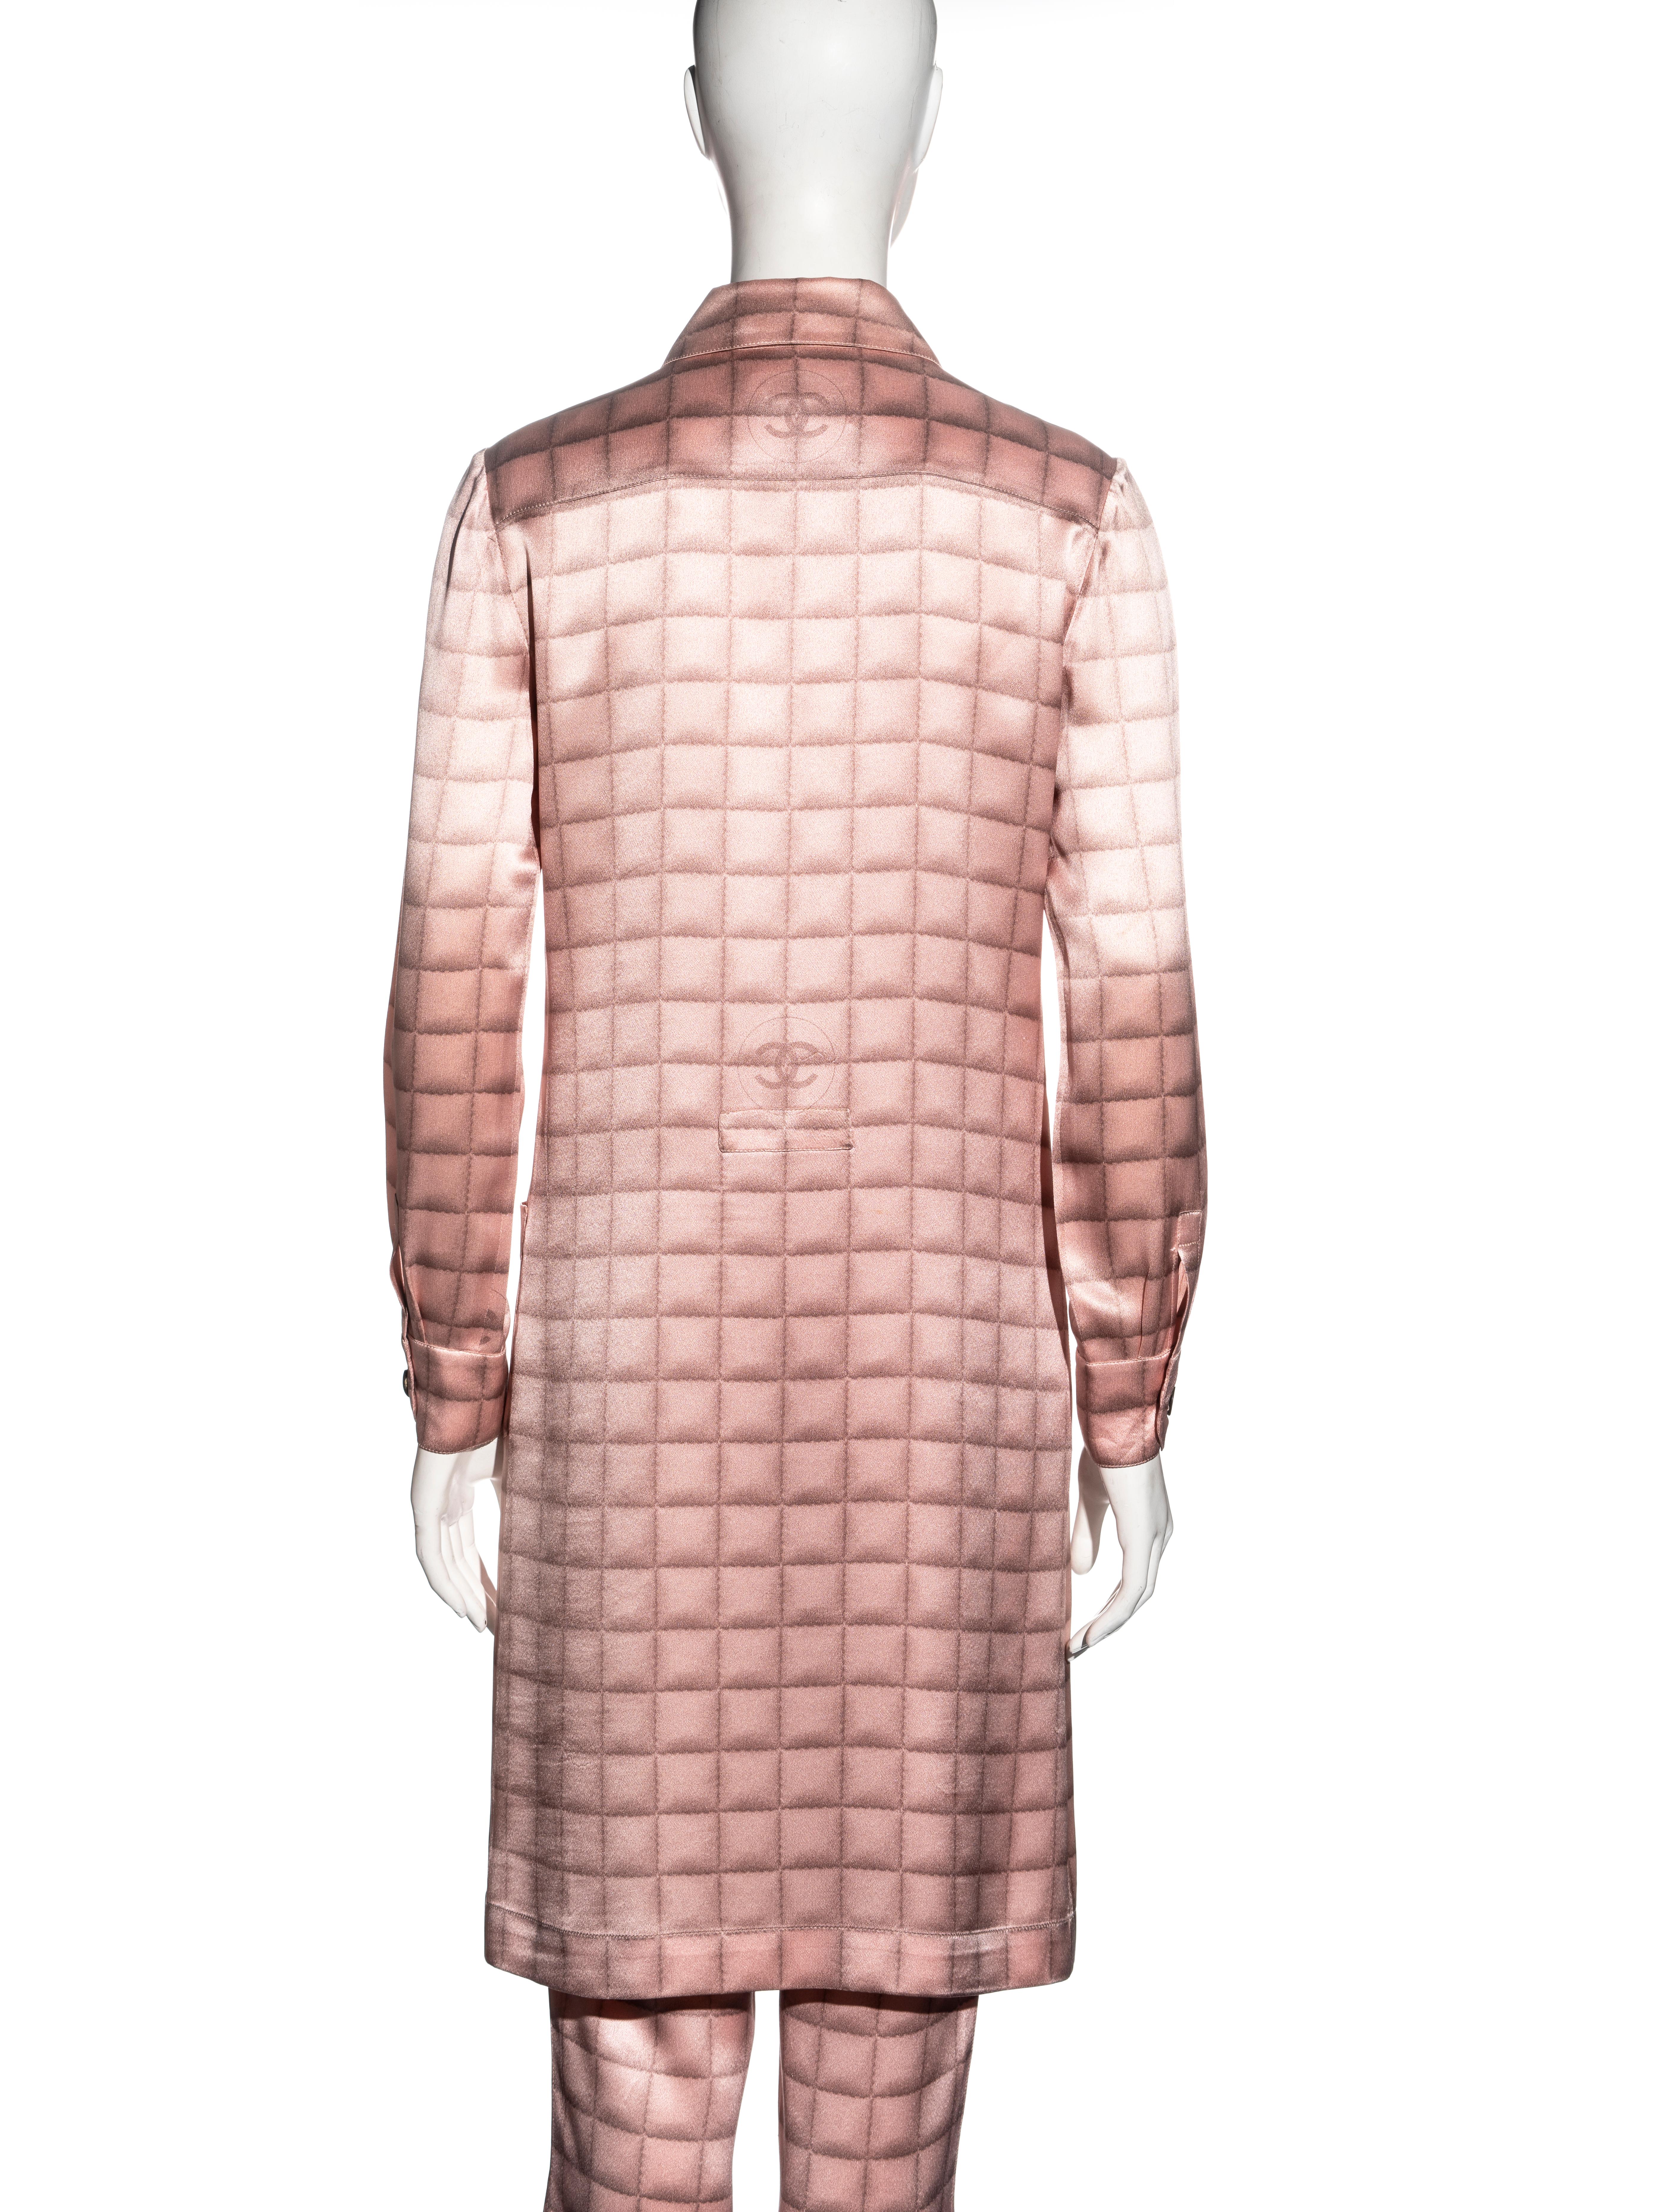 Chanel by Karl Lagerfeld pink silk shirt dress and pants suit, fw 2000 5